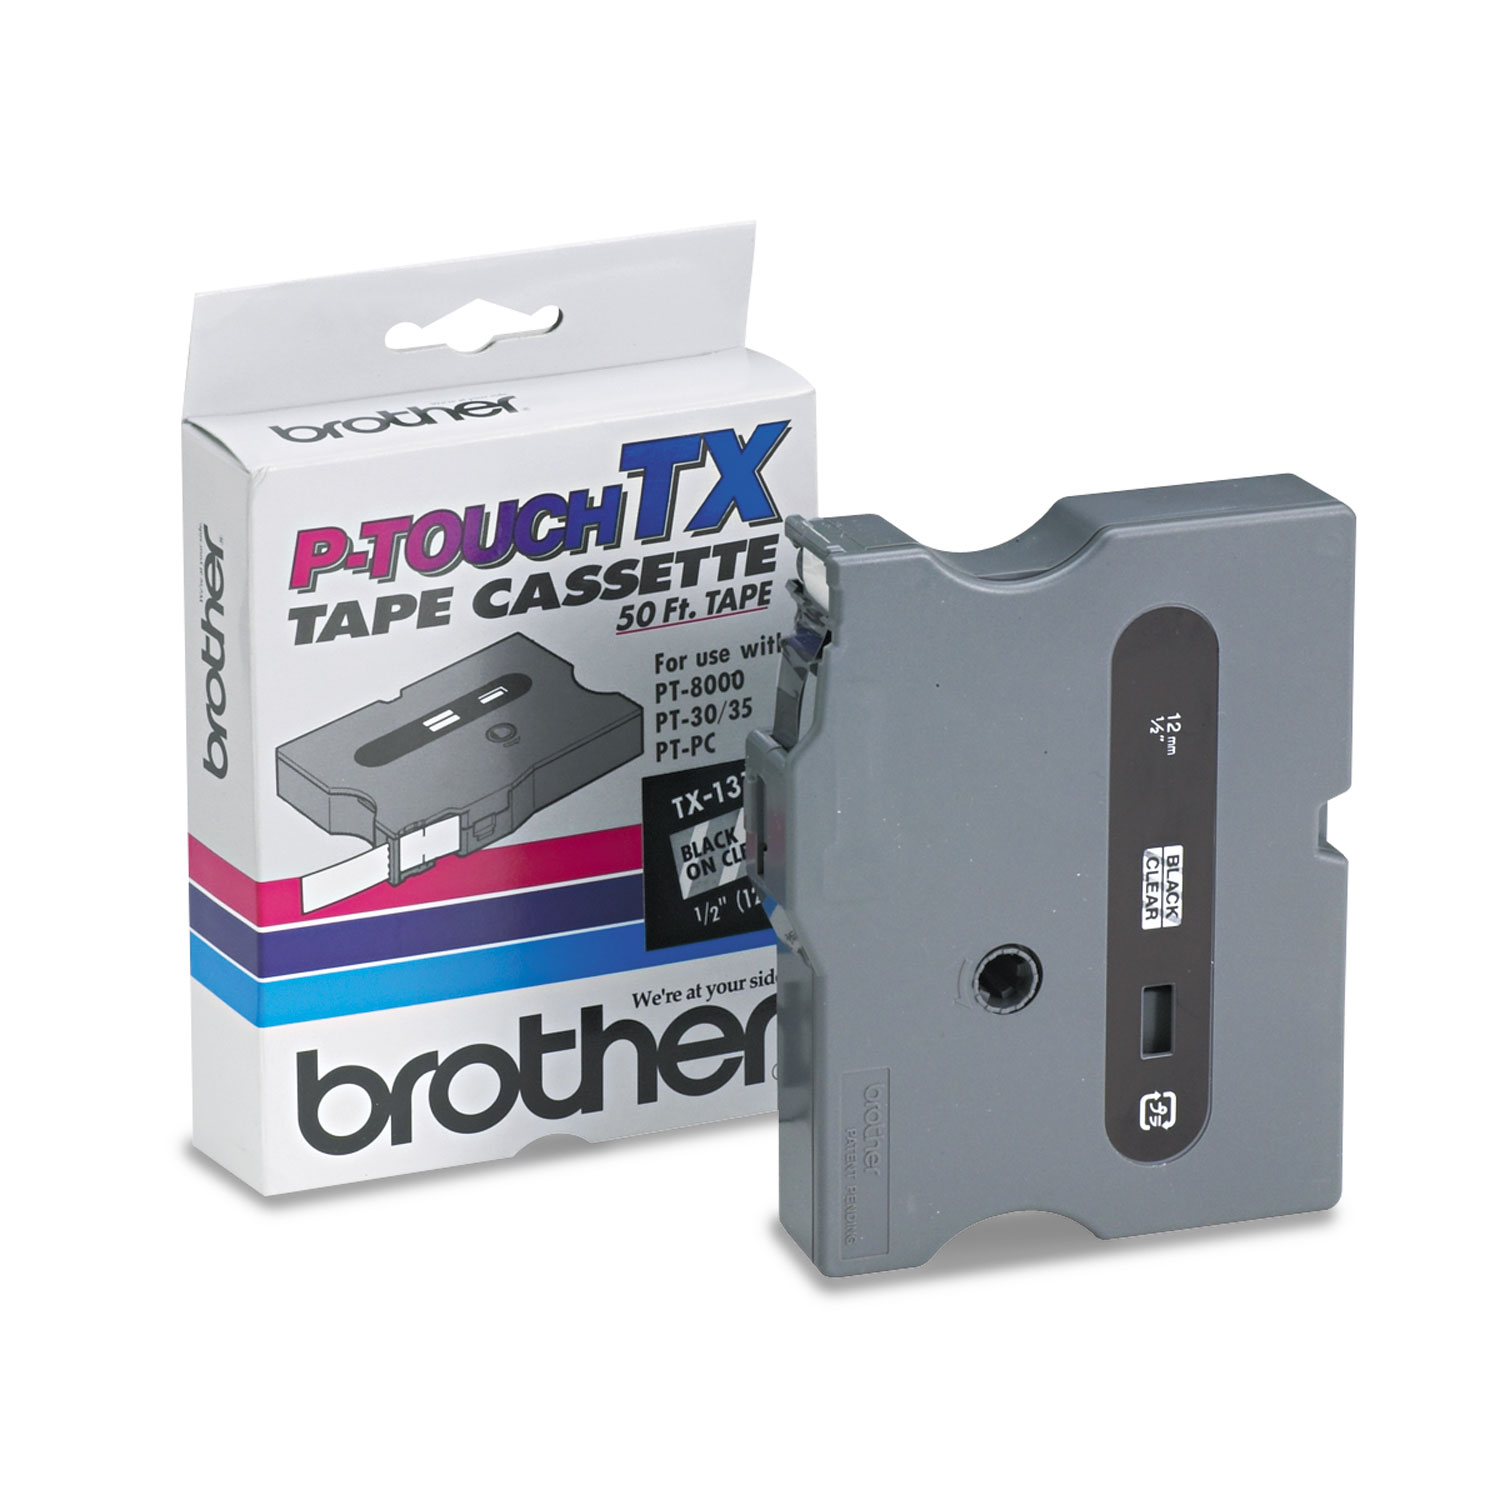  Brother P-Touch TX1311 TX Tape Cartridge for PT-8000, PT-PC, PT-30/35, 0.47 x 50 ft, Black on Clear (BRTTX1311) 